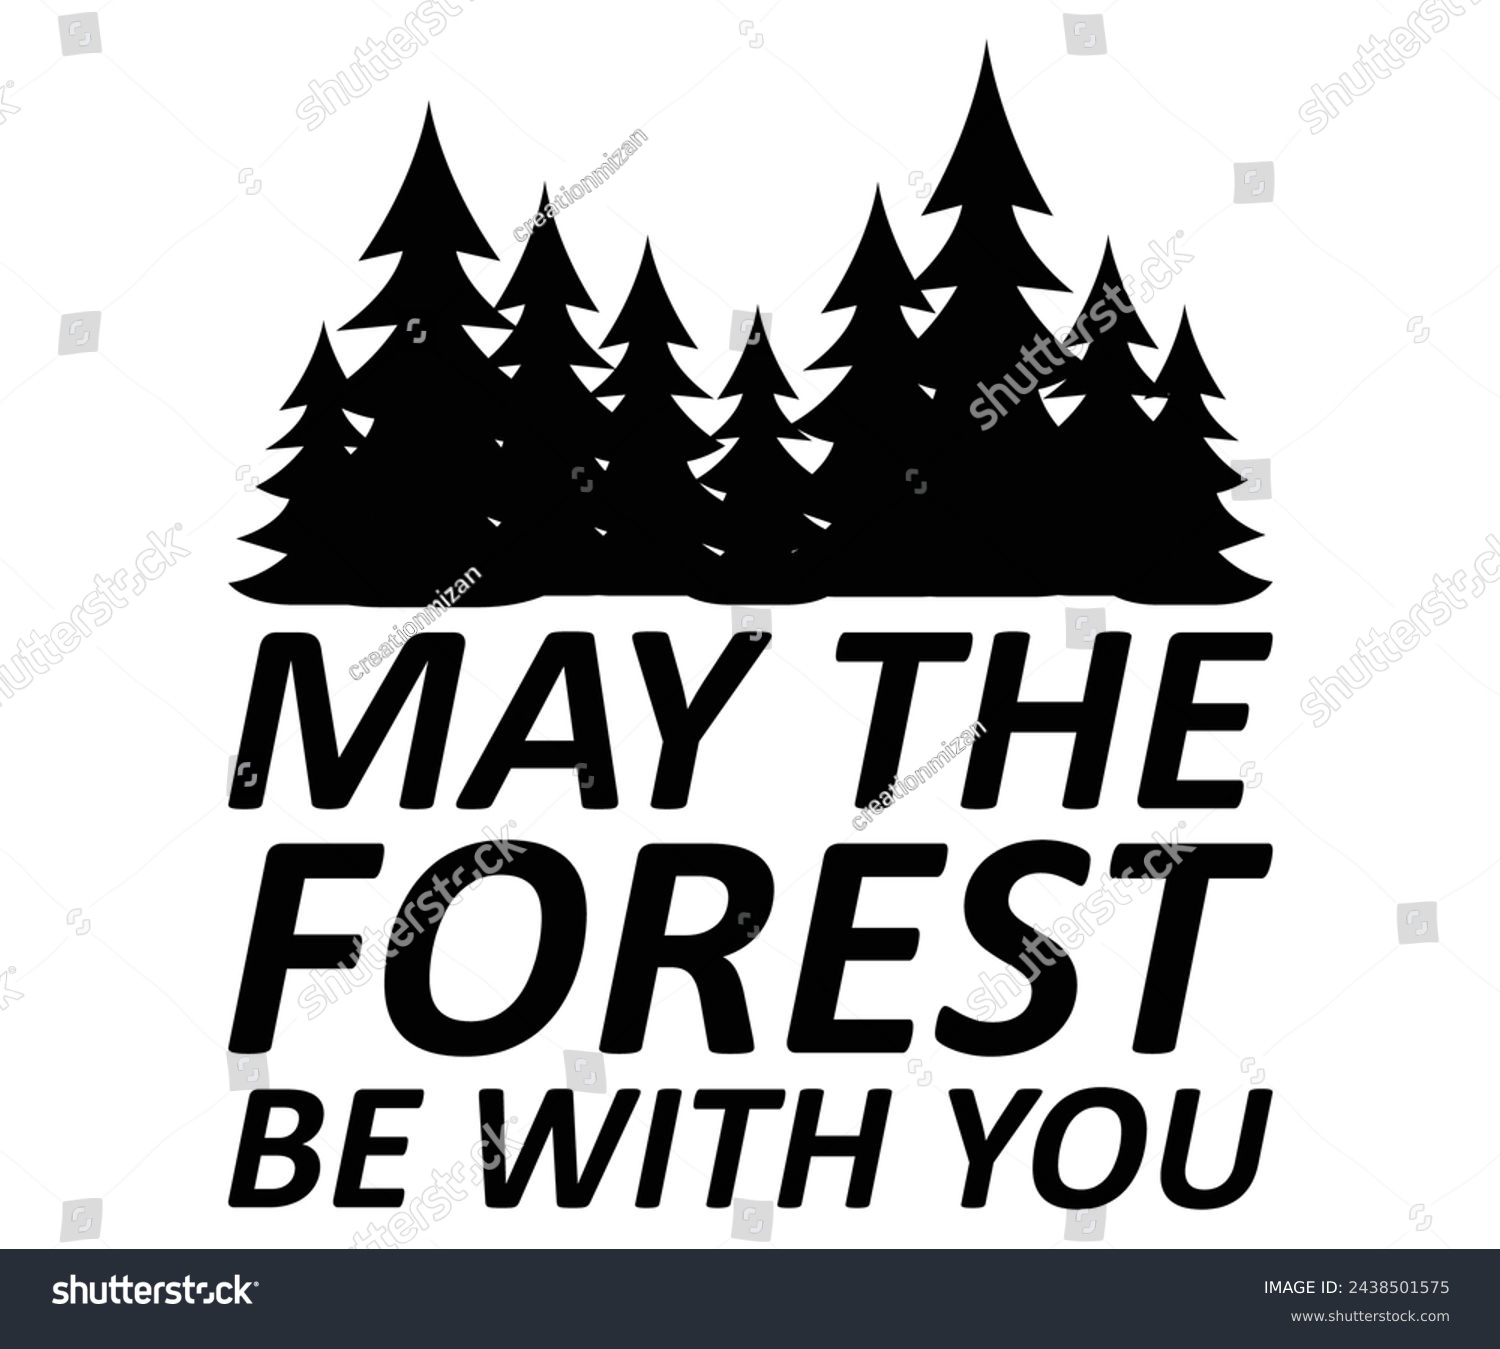 SVG of May The Forest Be With You Svg,Camping Svg,Hiking,Funny Camping,Adventure,Summer Camp,Happy Camper,Camp Life,Camp Saying,Camping Shirt svg